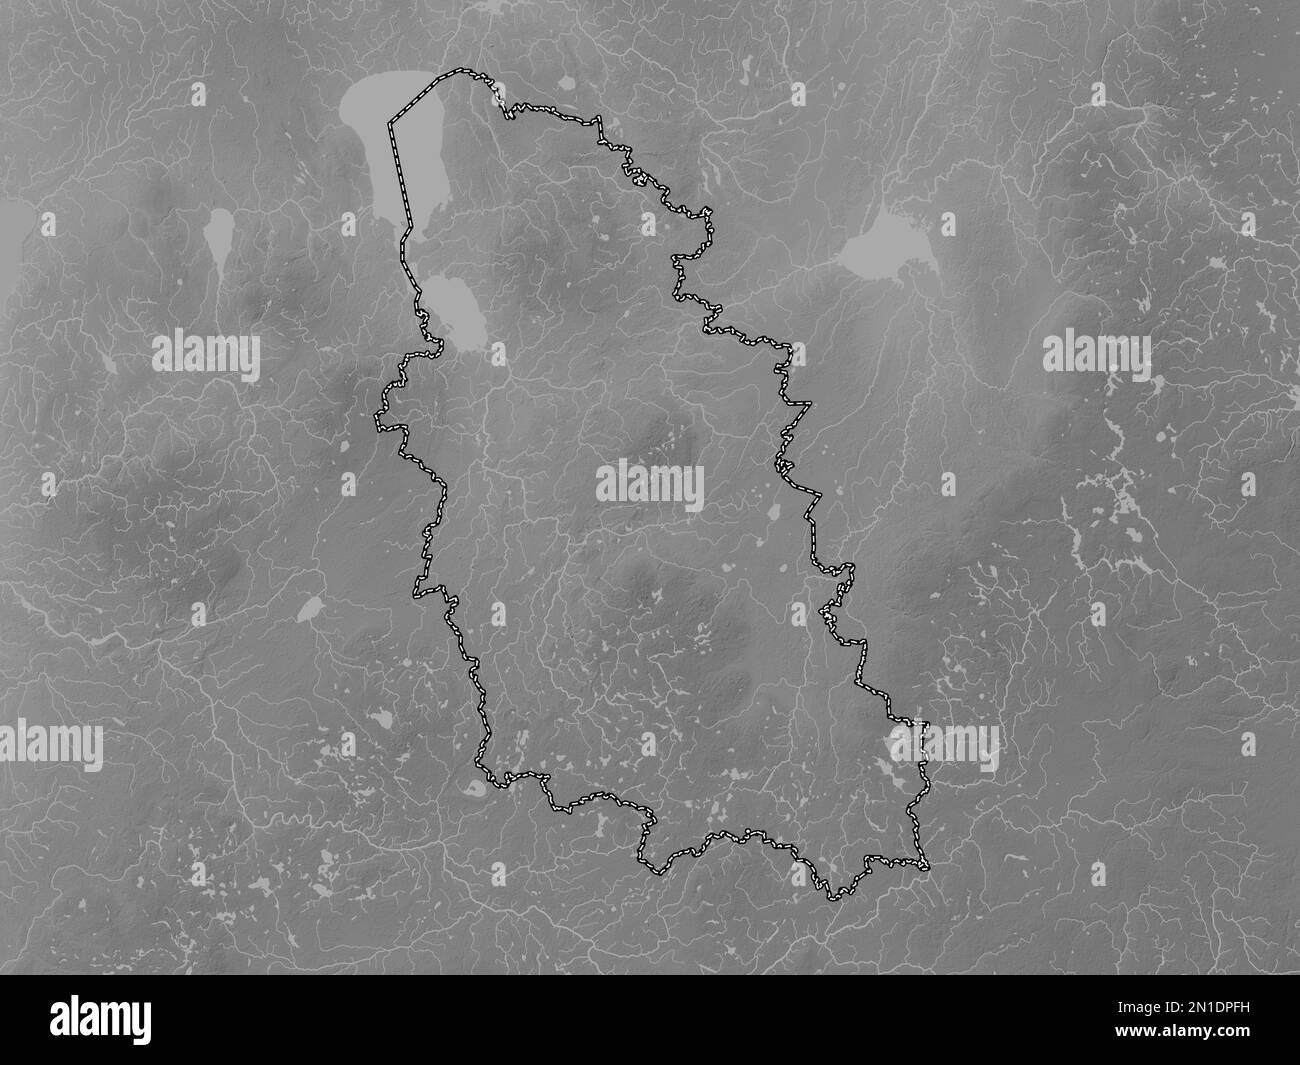 Pskov, region of Russia. Grayscale elevation map with lakes and rivers Stock Photo